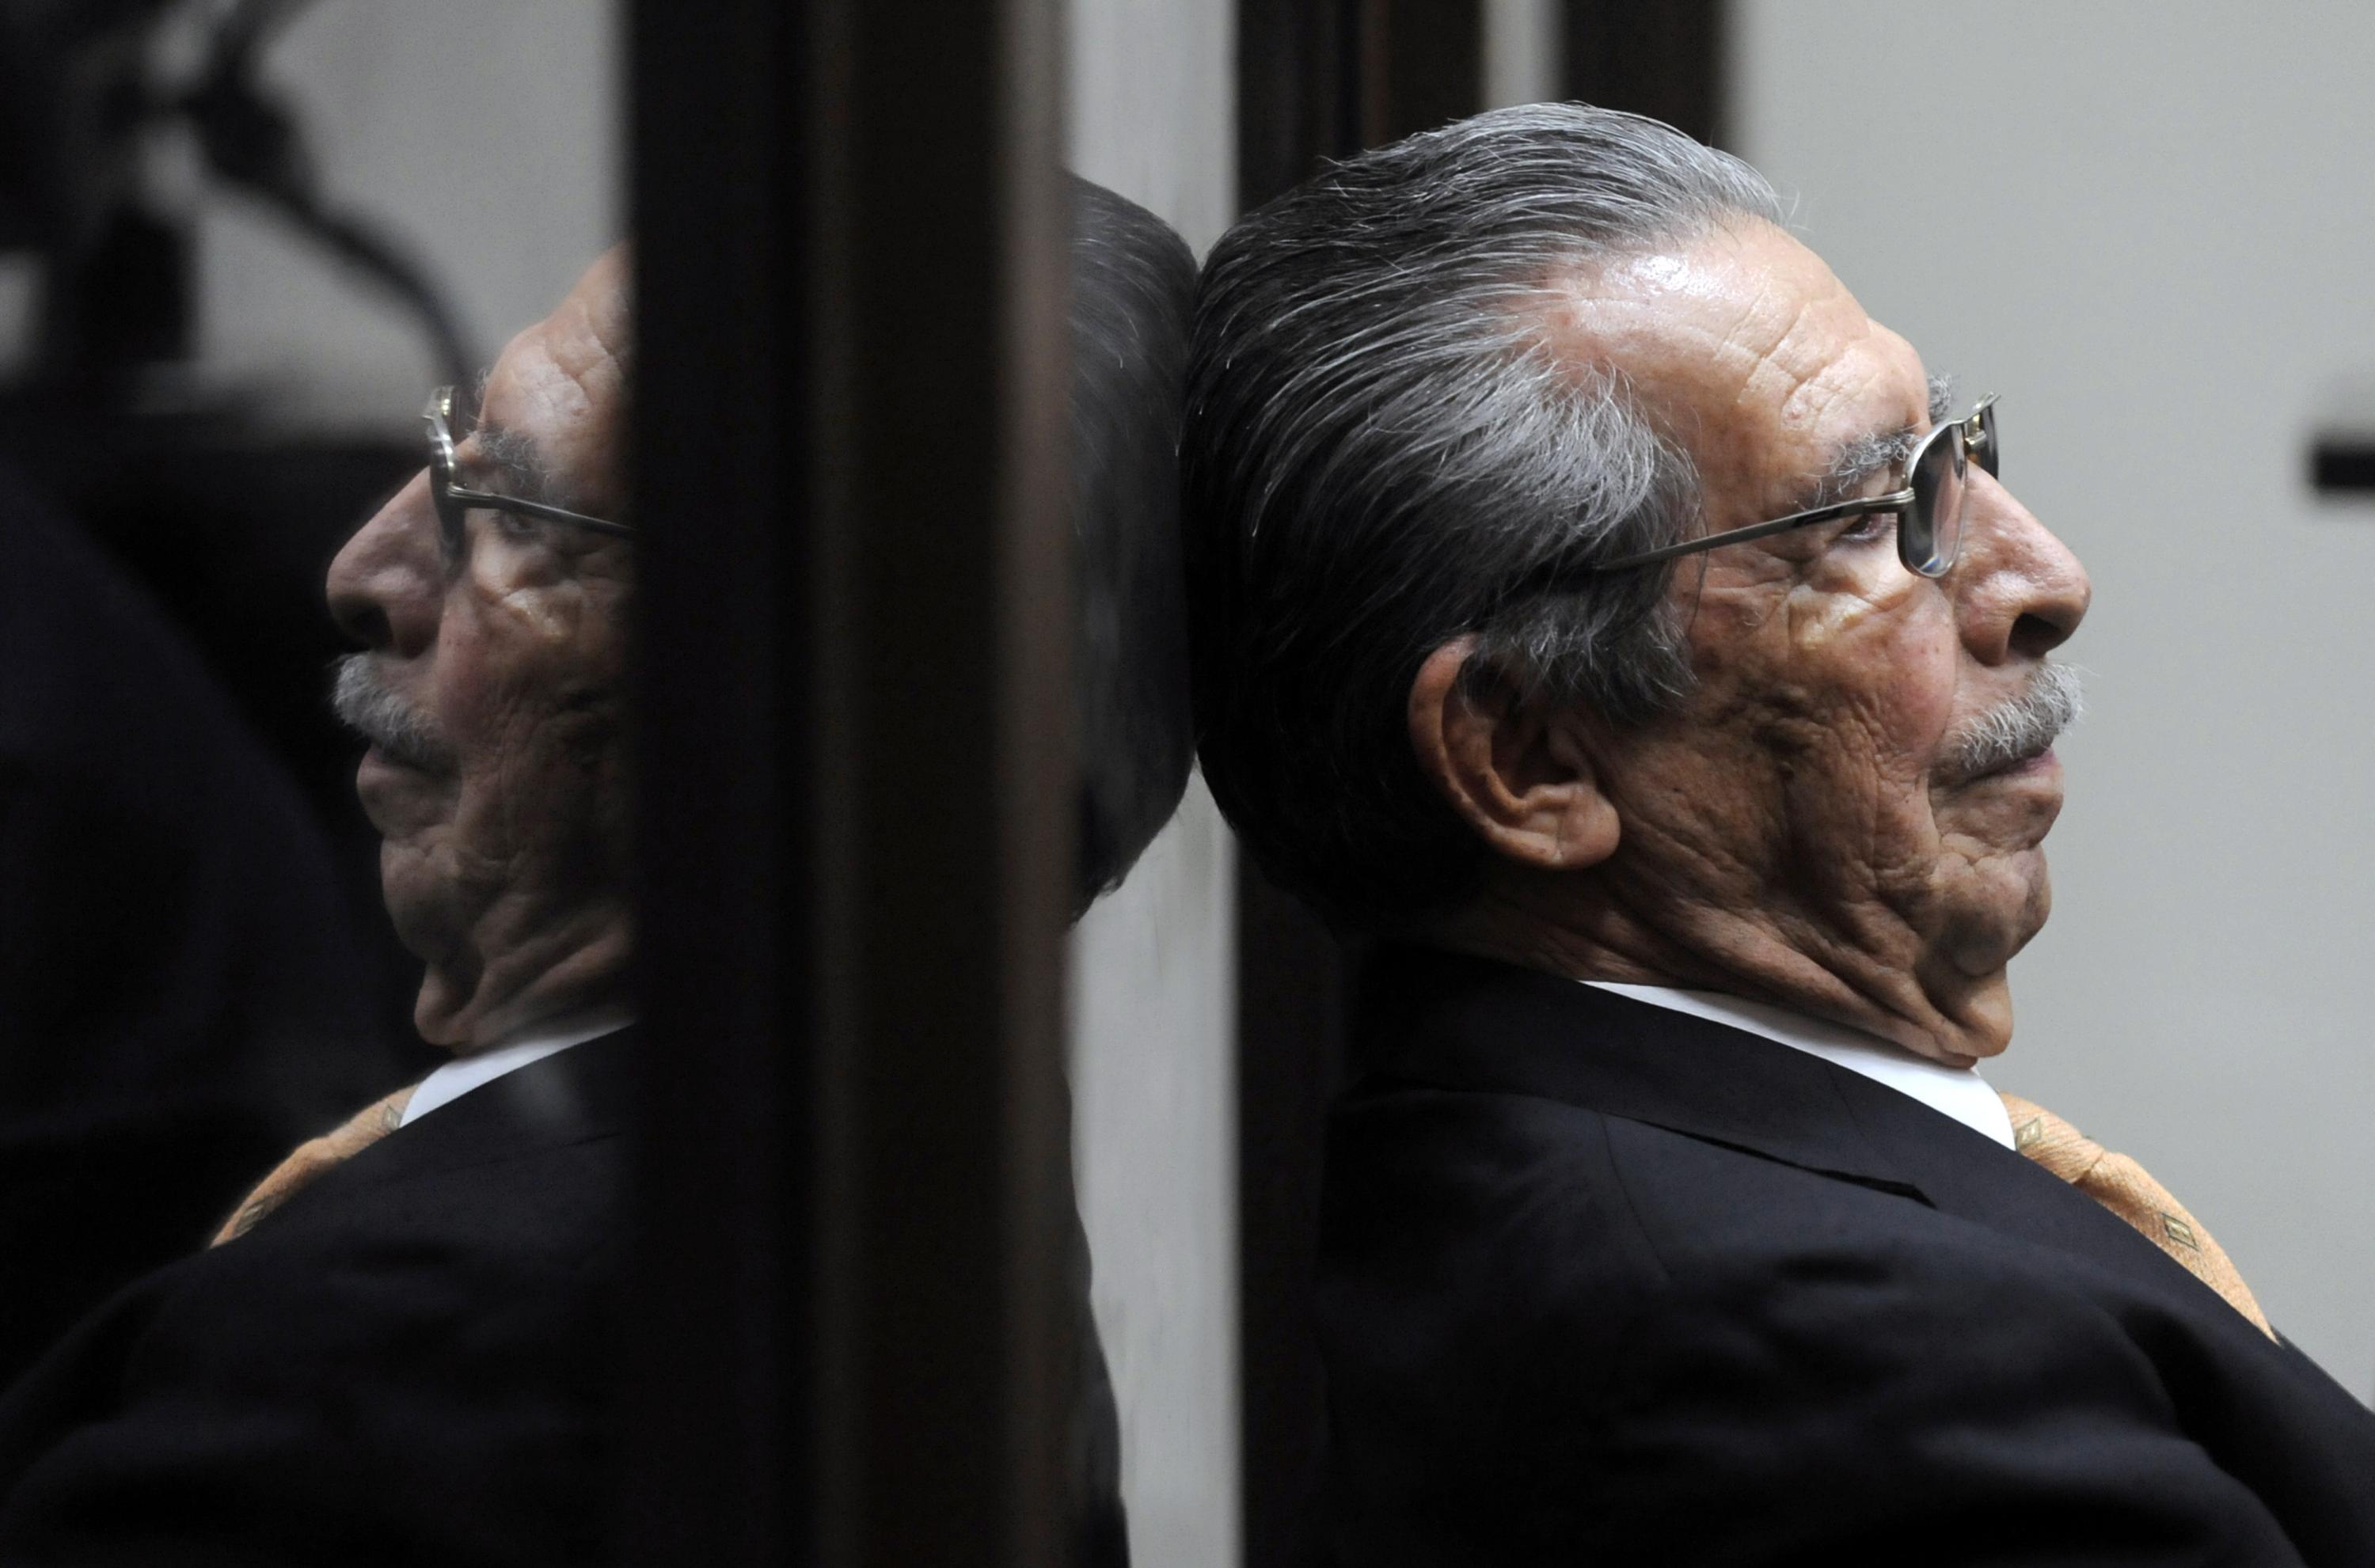 Retired general Efraín Ríos Montt takes a break during one of the genocide trial hearings. Photo taken on January 31, 2013. Photo: Johan Ordóñez Ríos/AFP